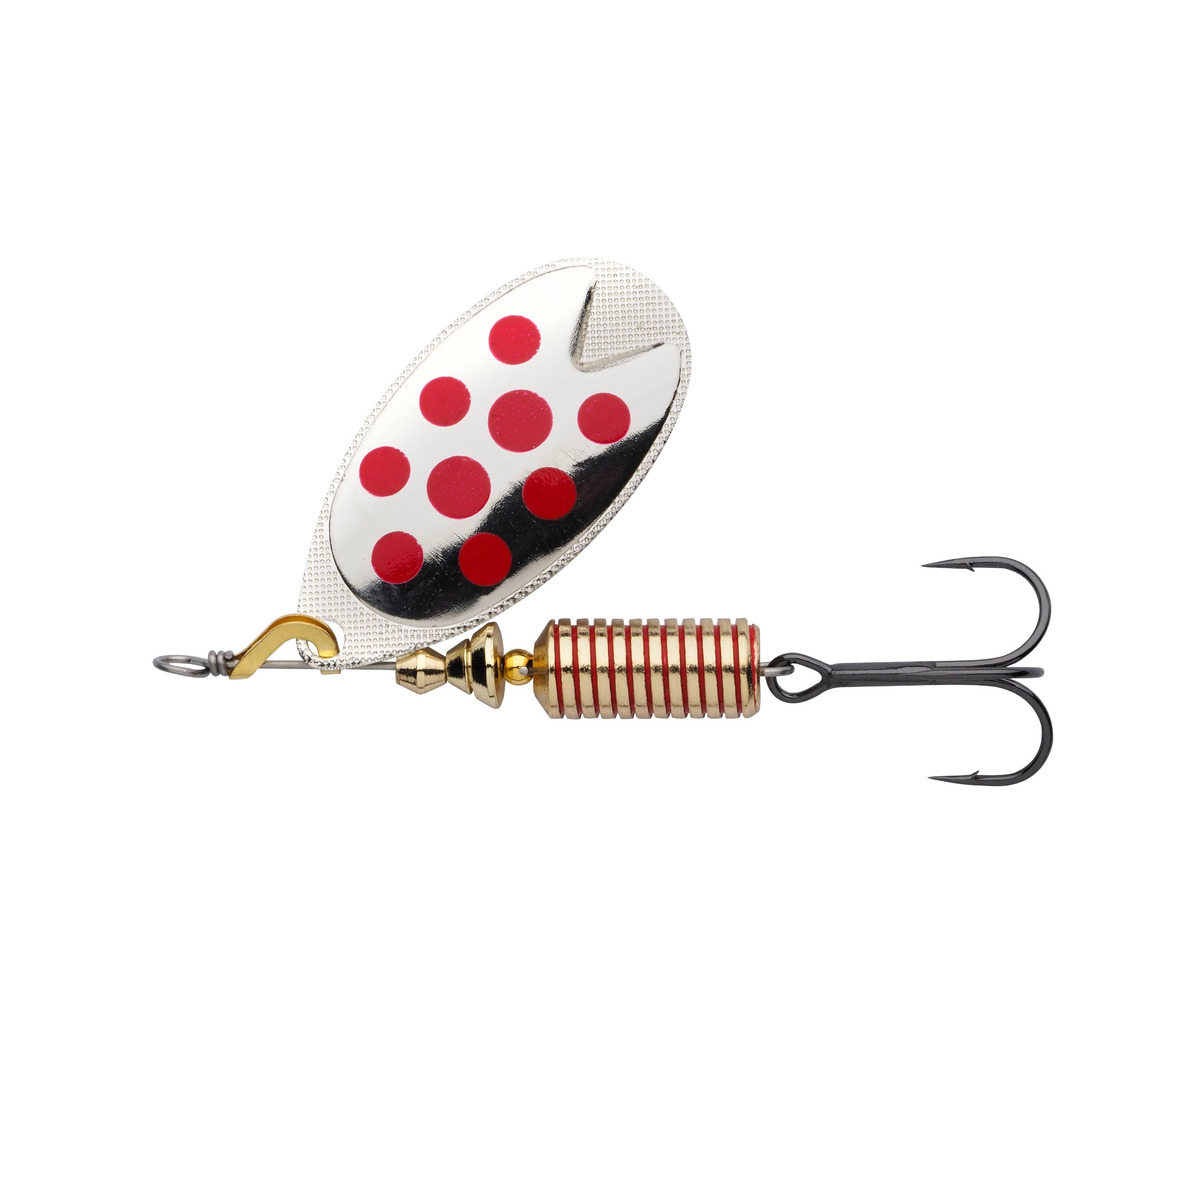 Abu Garcia Fast Attack Spinners 7 G - Silver-Red Dots - 40 mm